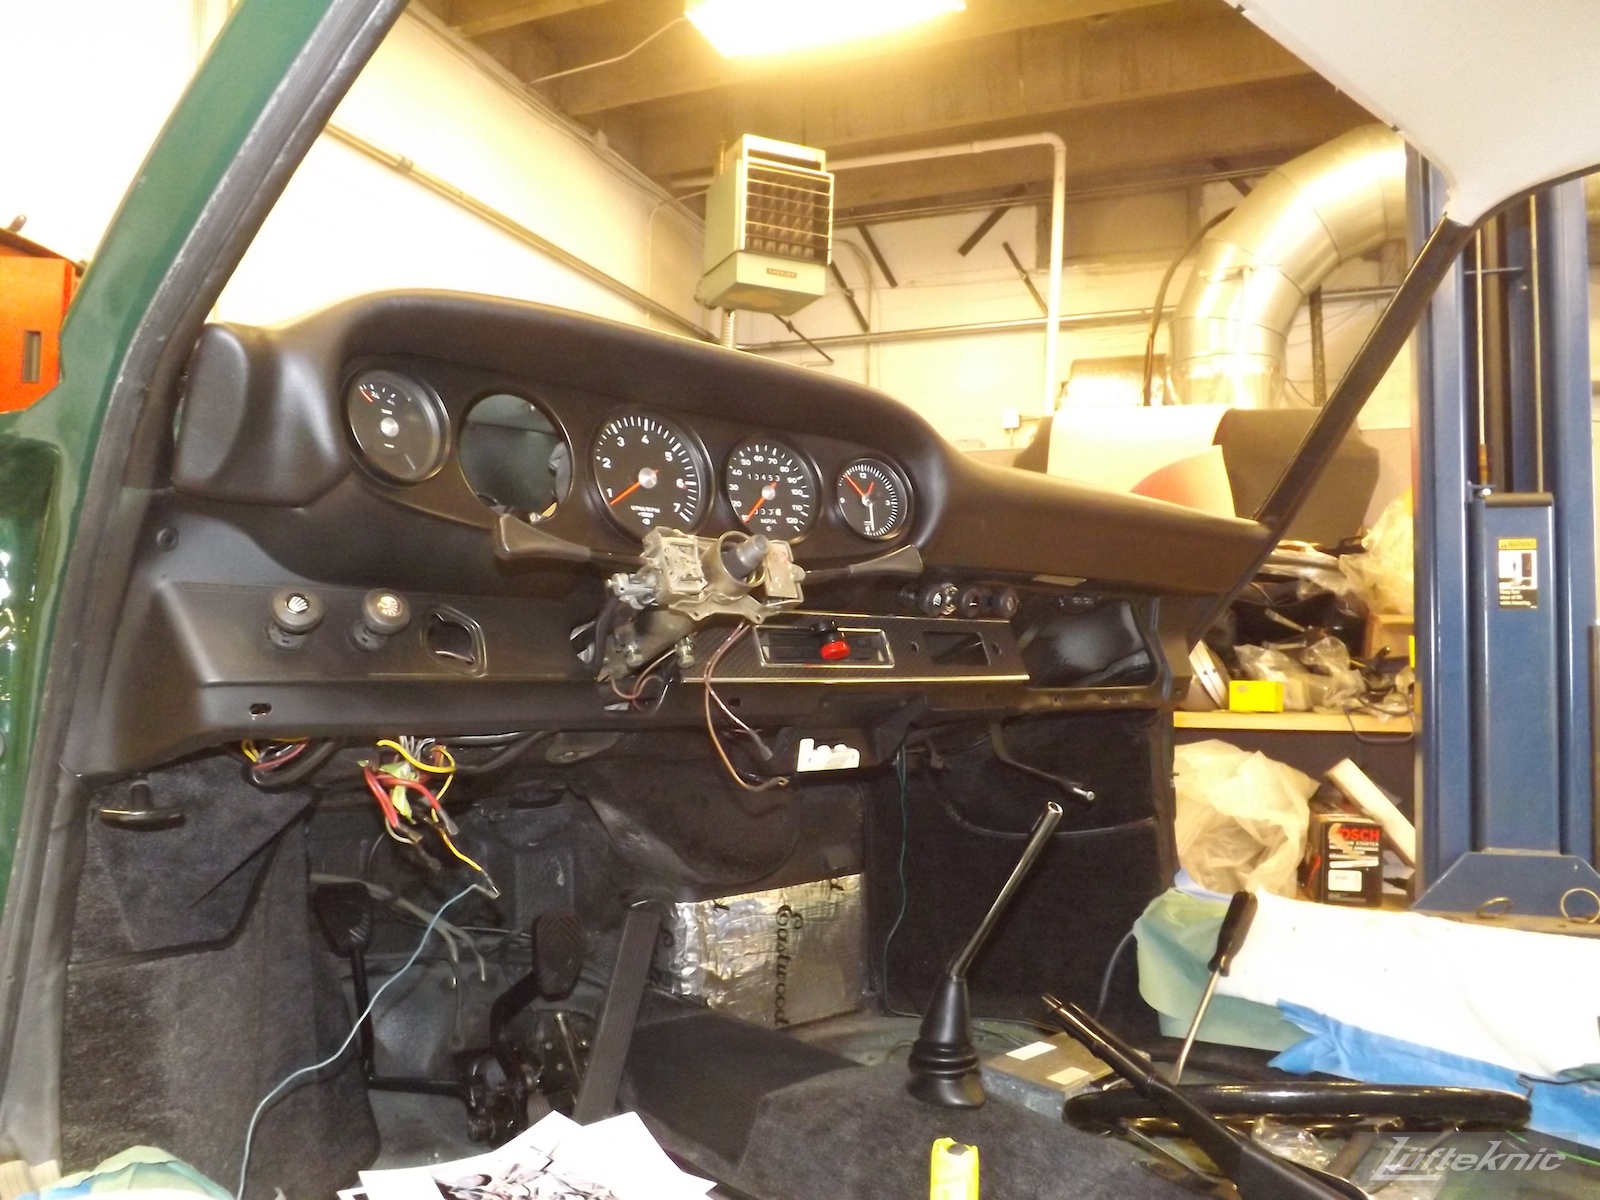 Interior reassembly with dash board and gauges on an Irish Green Porsche 912 undergoing restoration at Lufteknic.